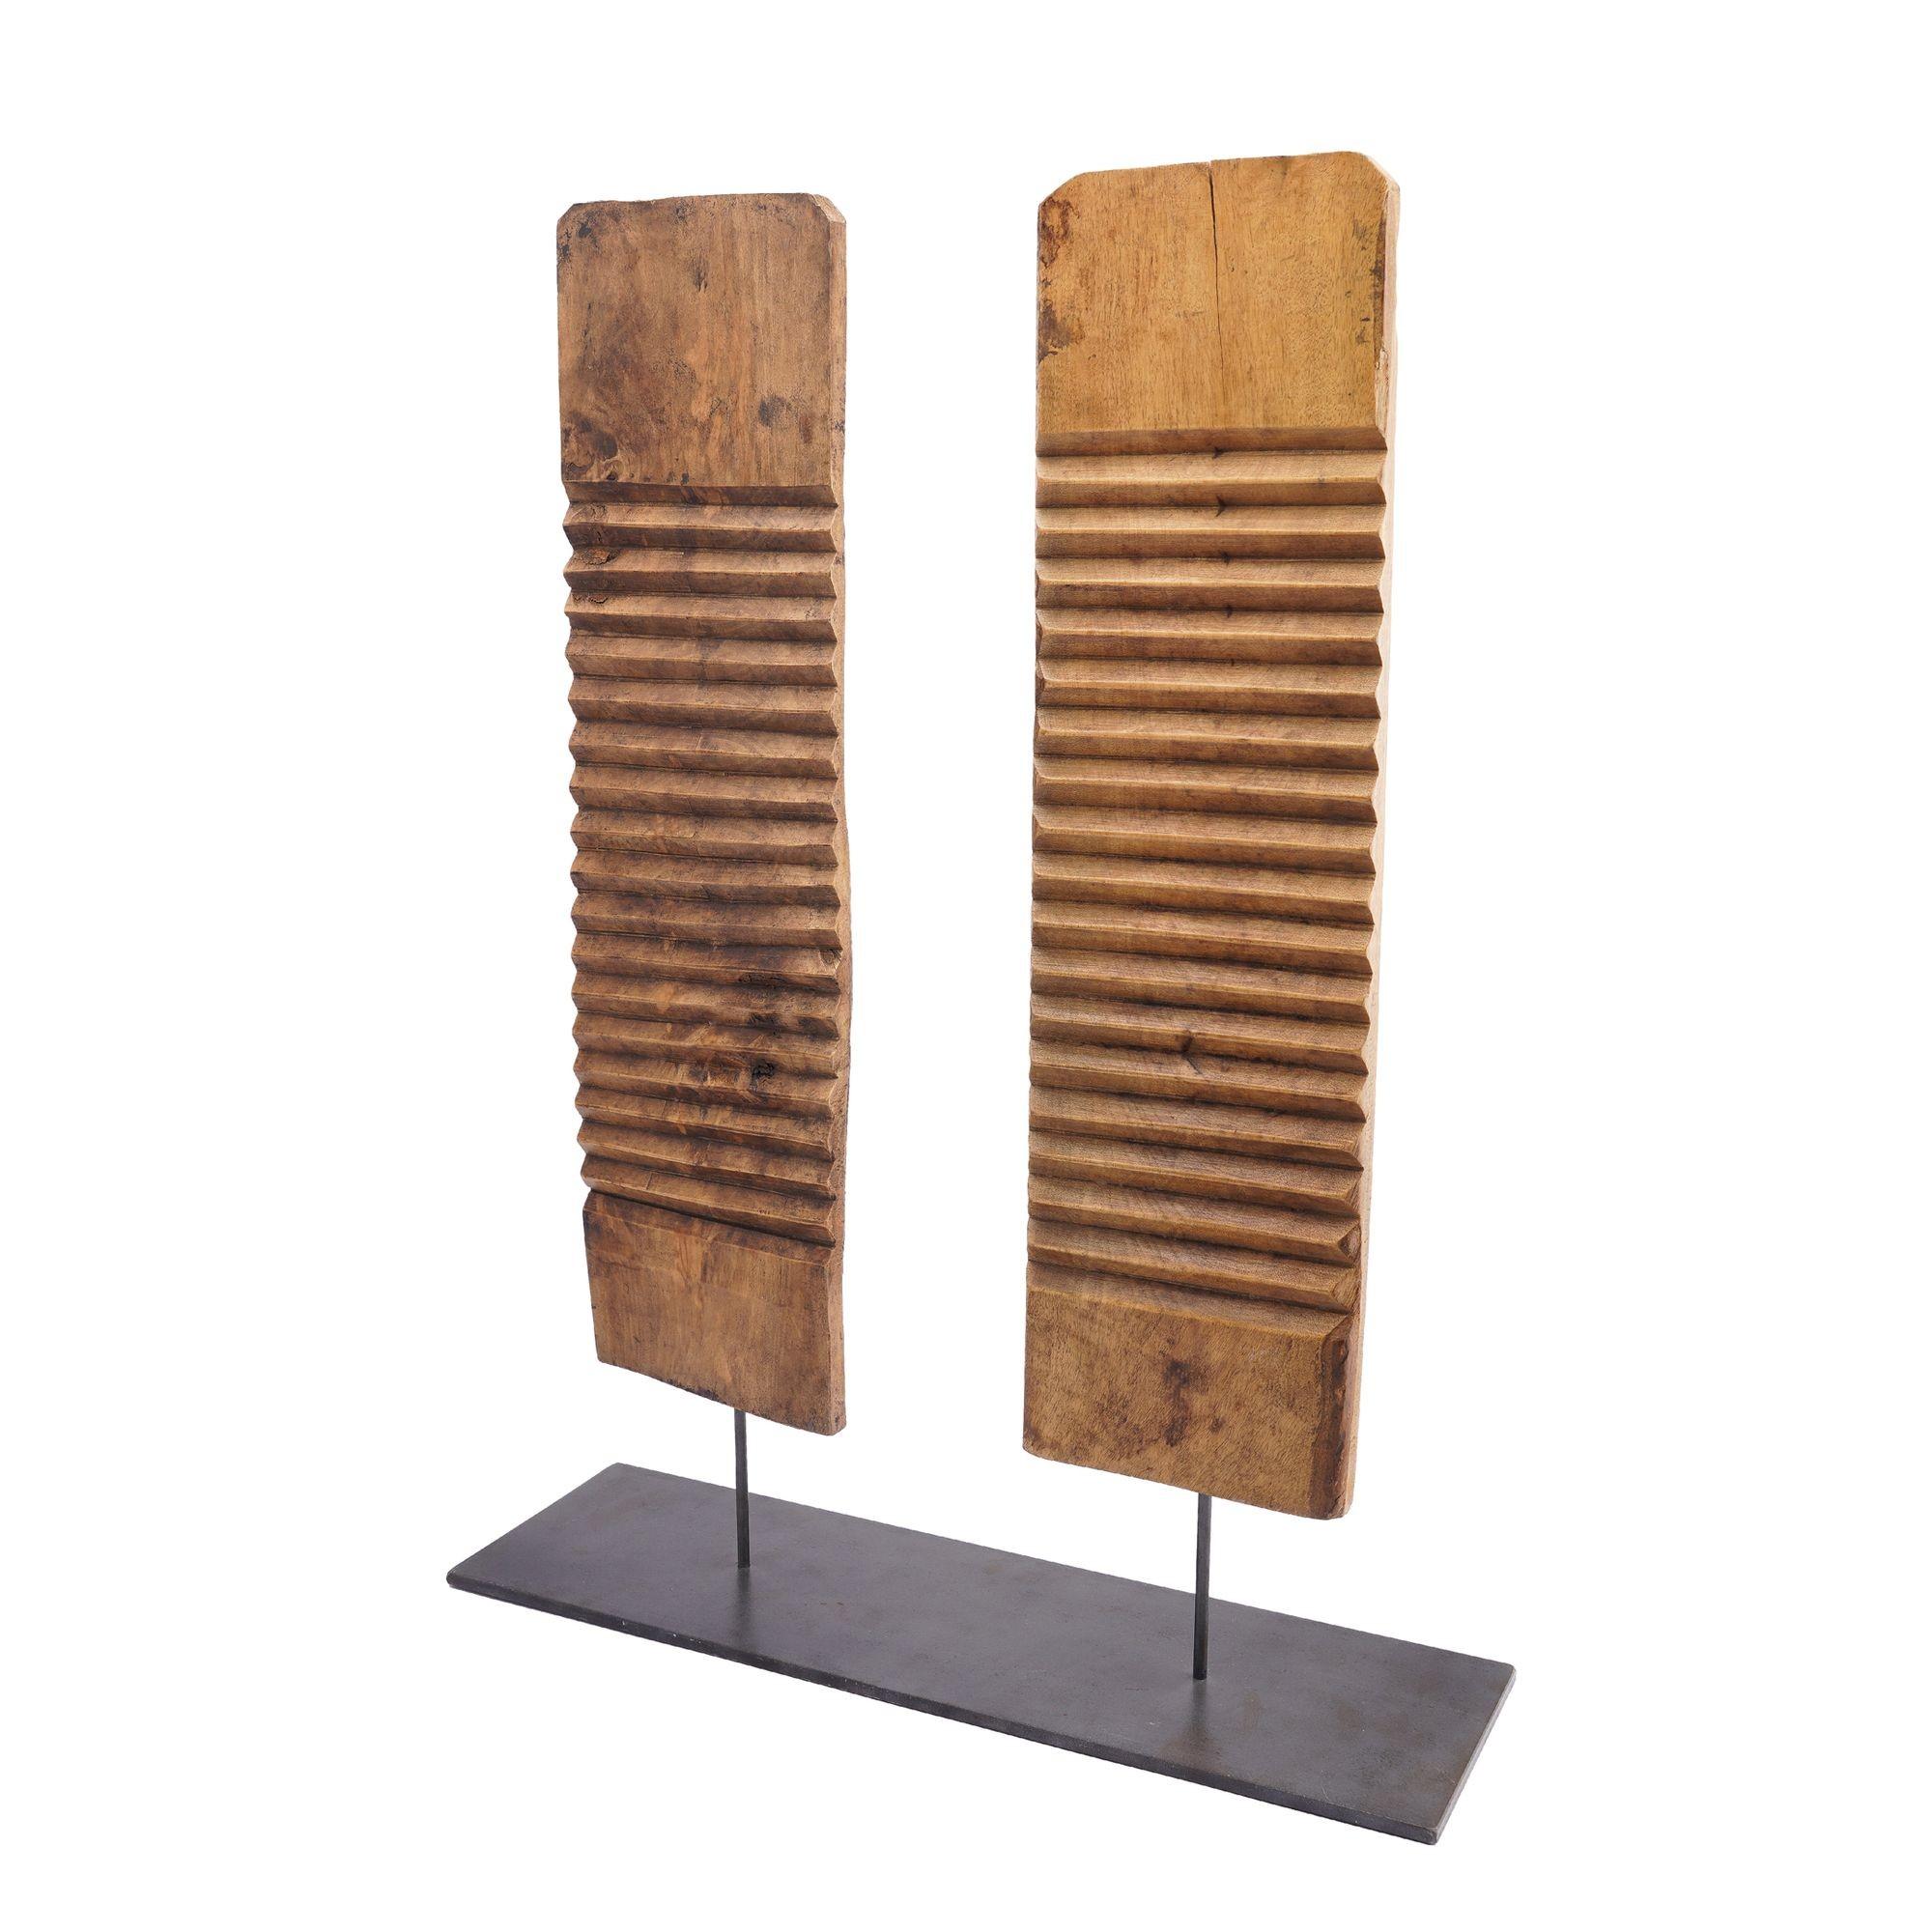 Pair of rib carved hardwood wash boards mounted on custom stand.
China, mid 19th century.